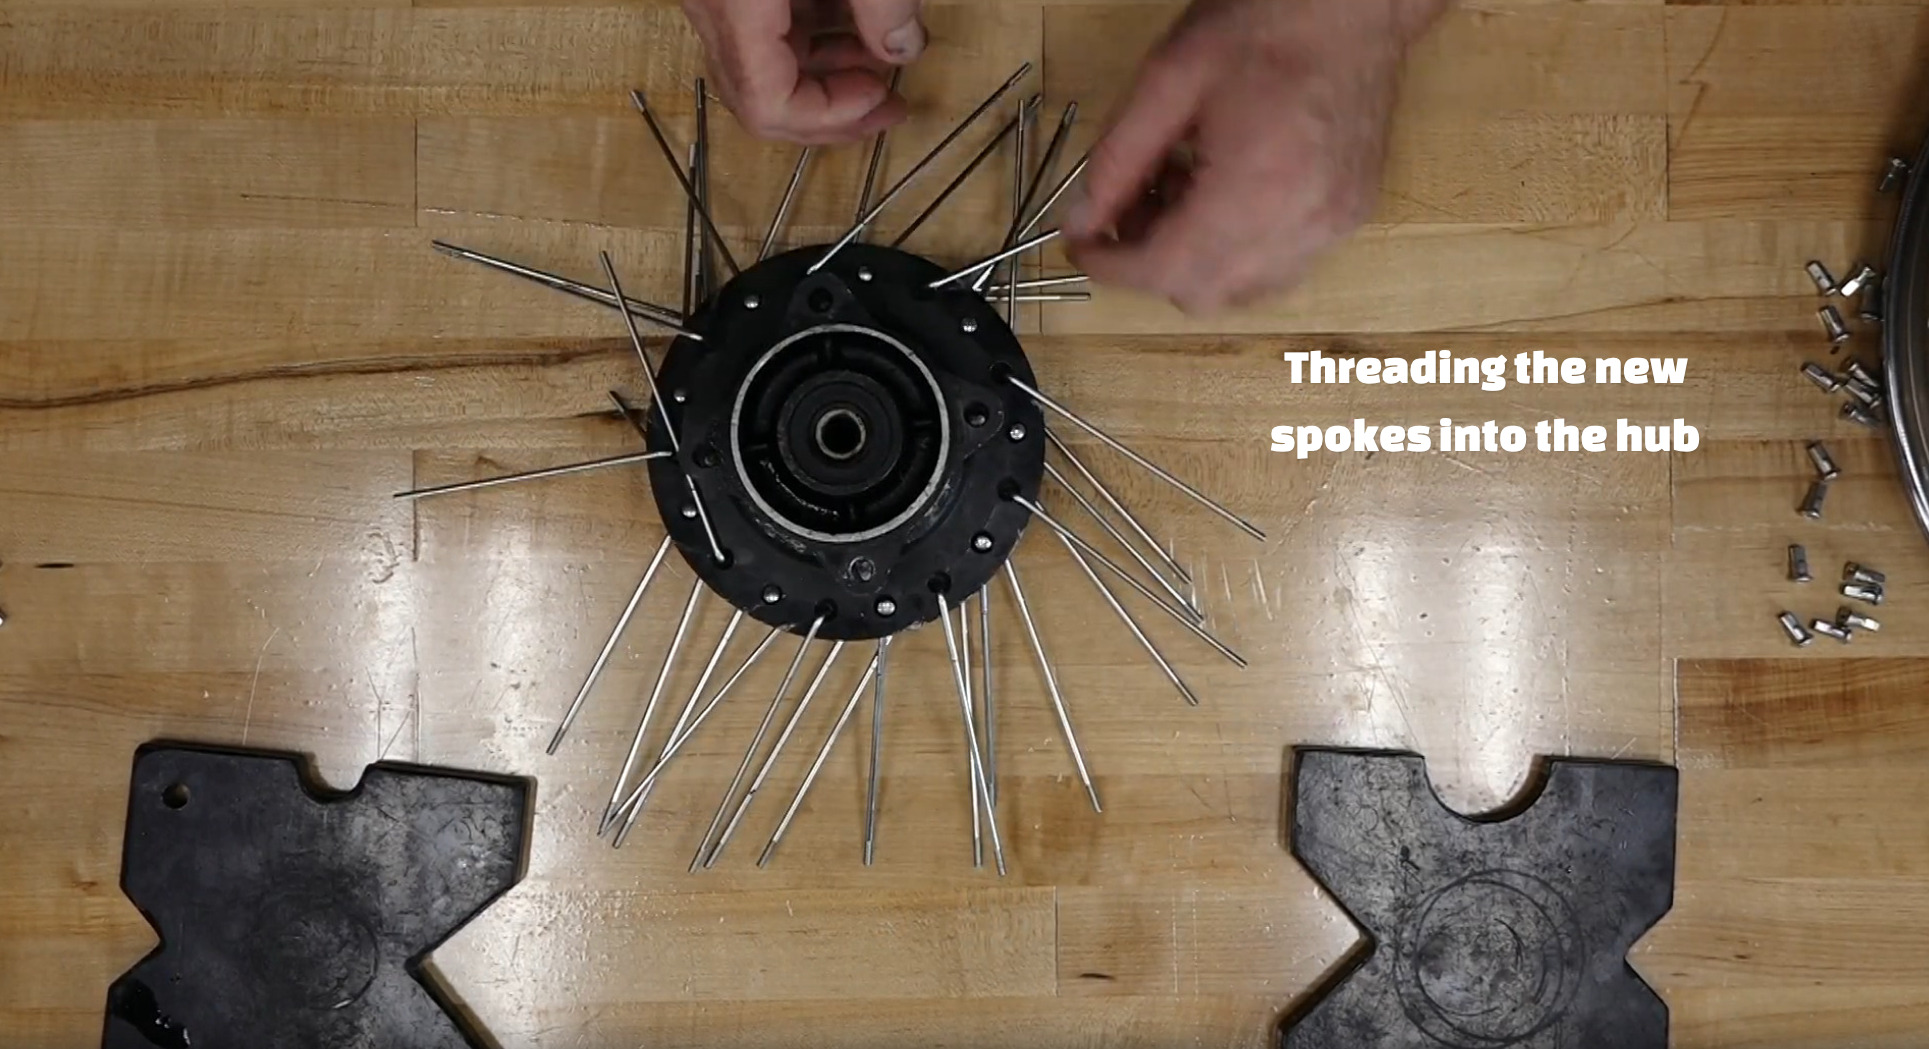 How to lace spokes onto a wheel